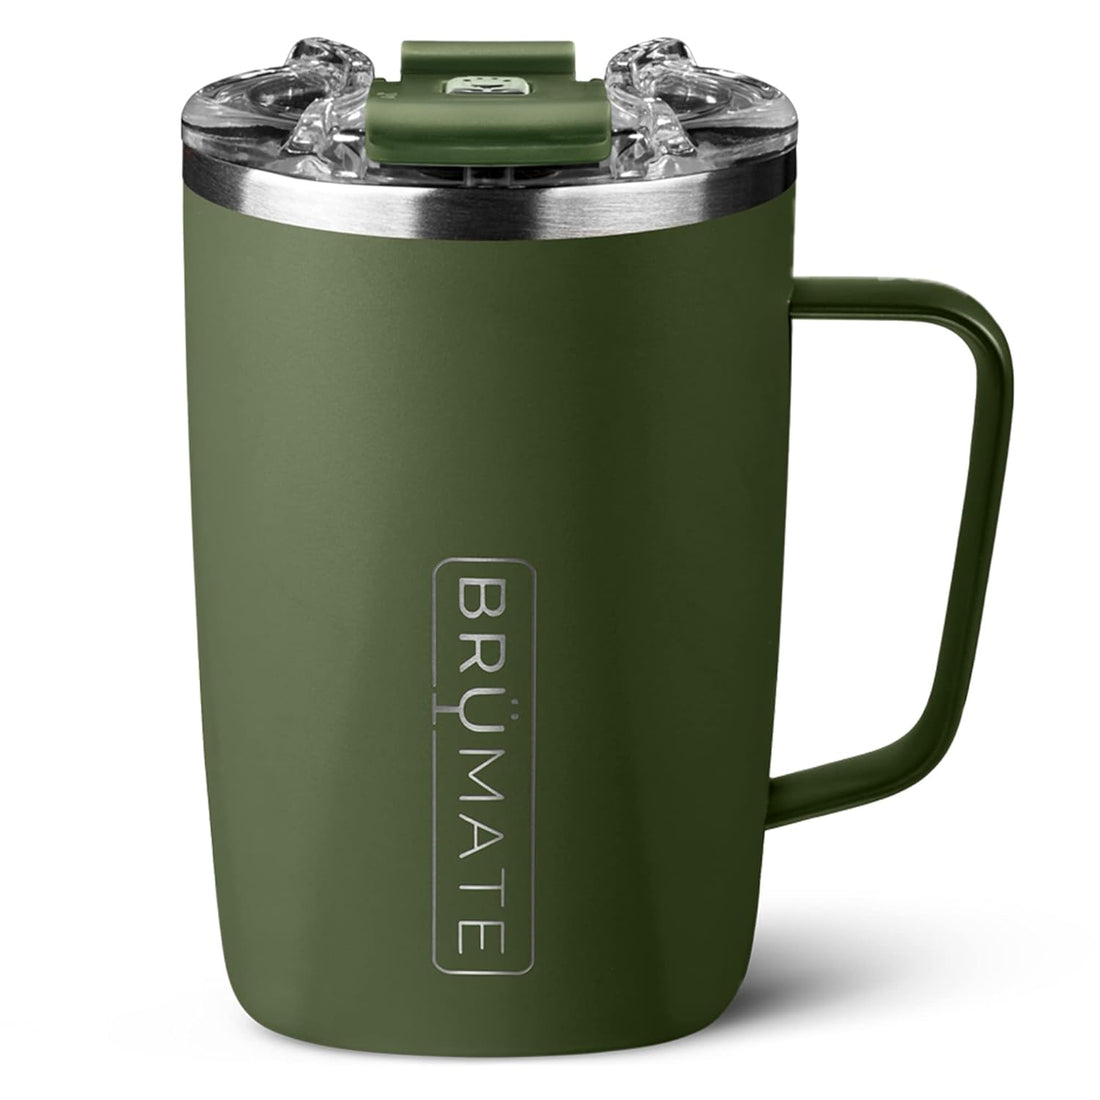 Brumate Toddy - Insulated Coffee Mug with Handle & Lid - 100% Leak-Proof Stainless Steel Coffee Travel Mug - Double Walled Coffee Cup - OD Green